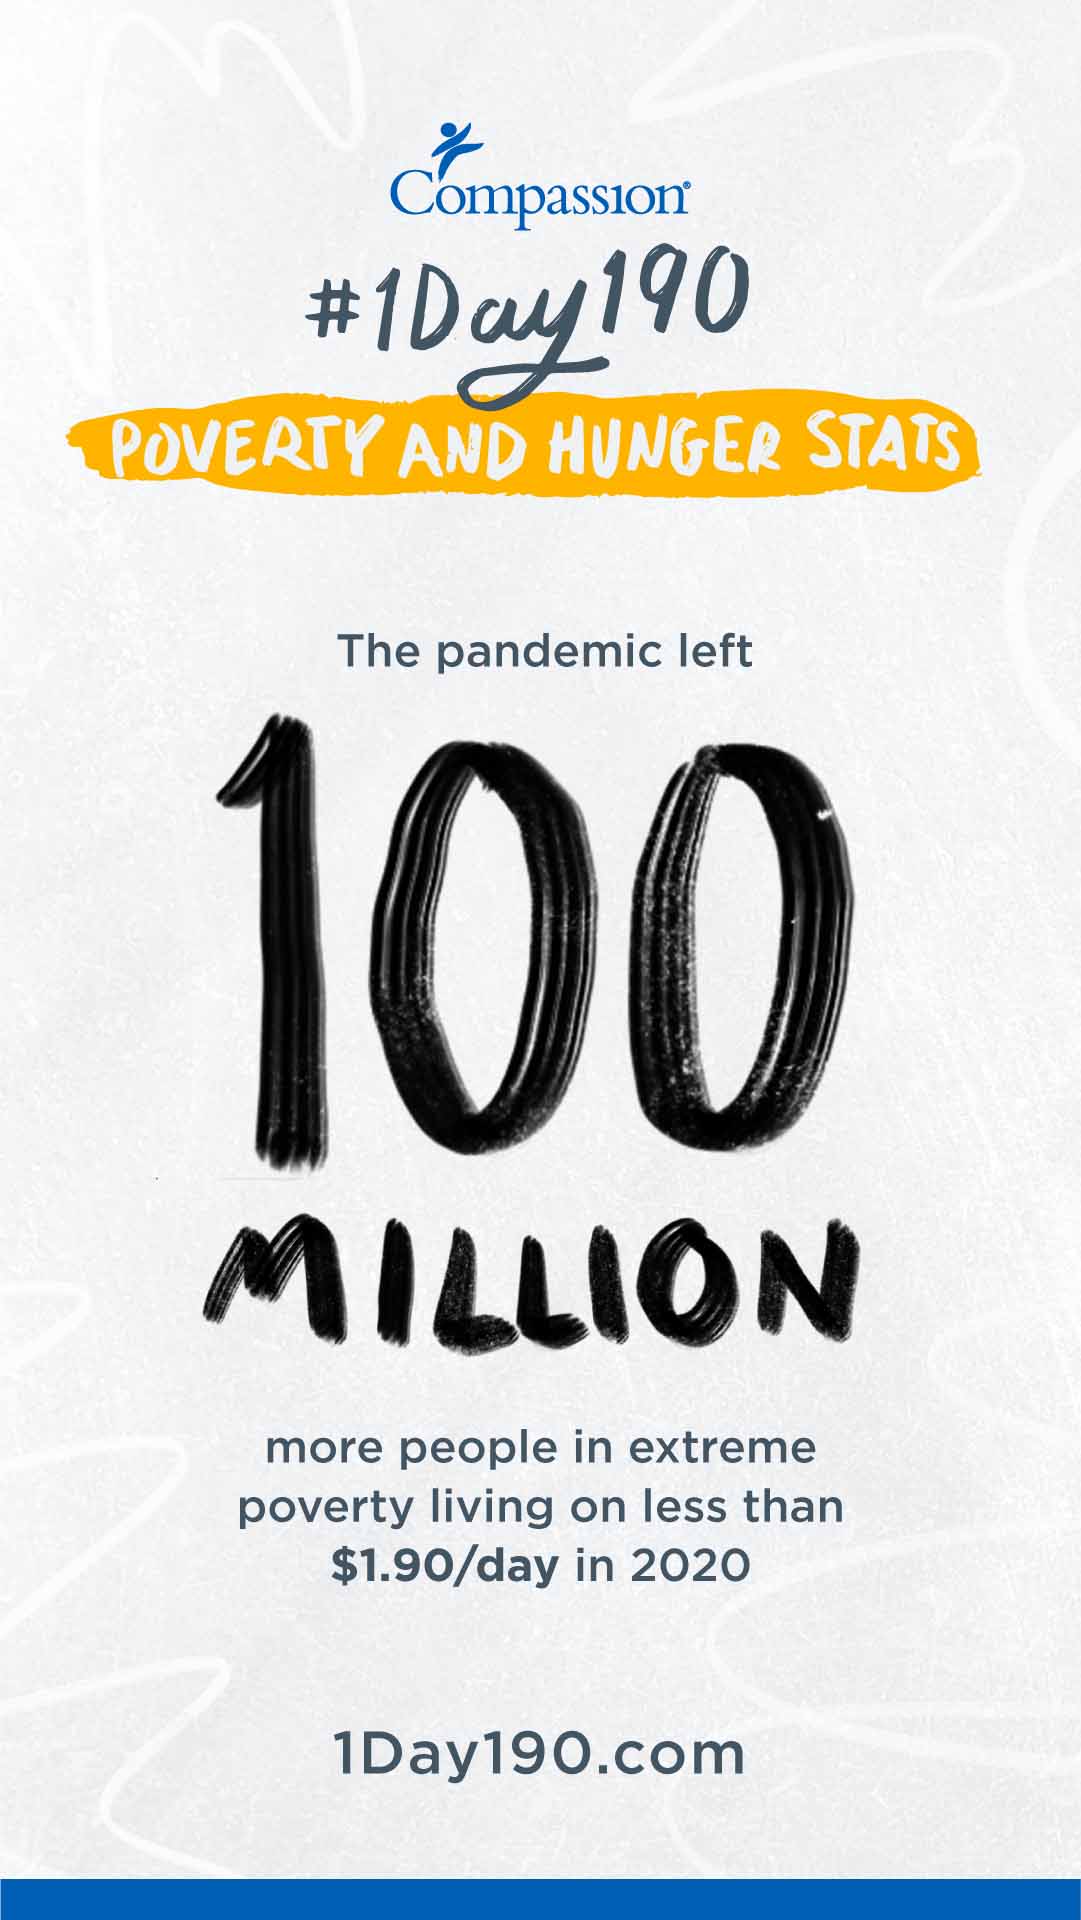 100 million people in extreme poverty